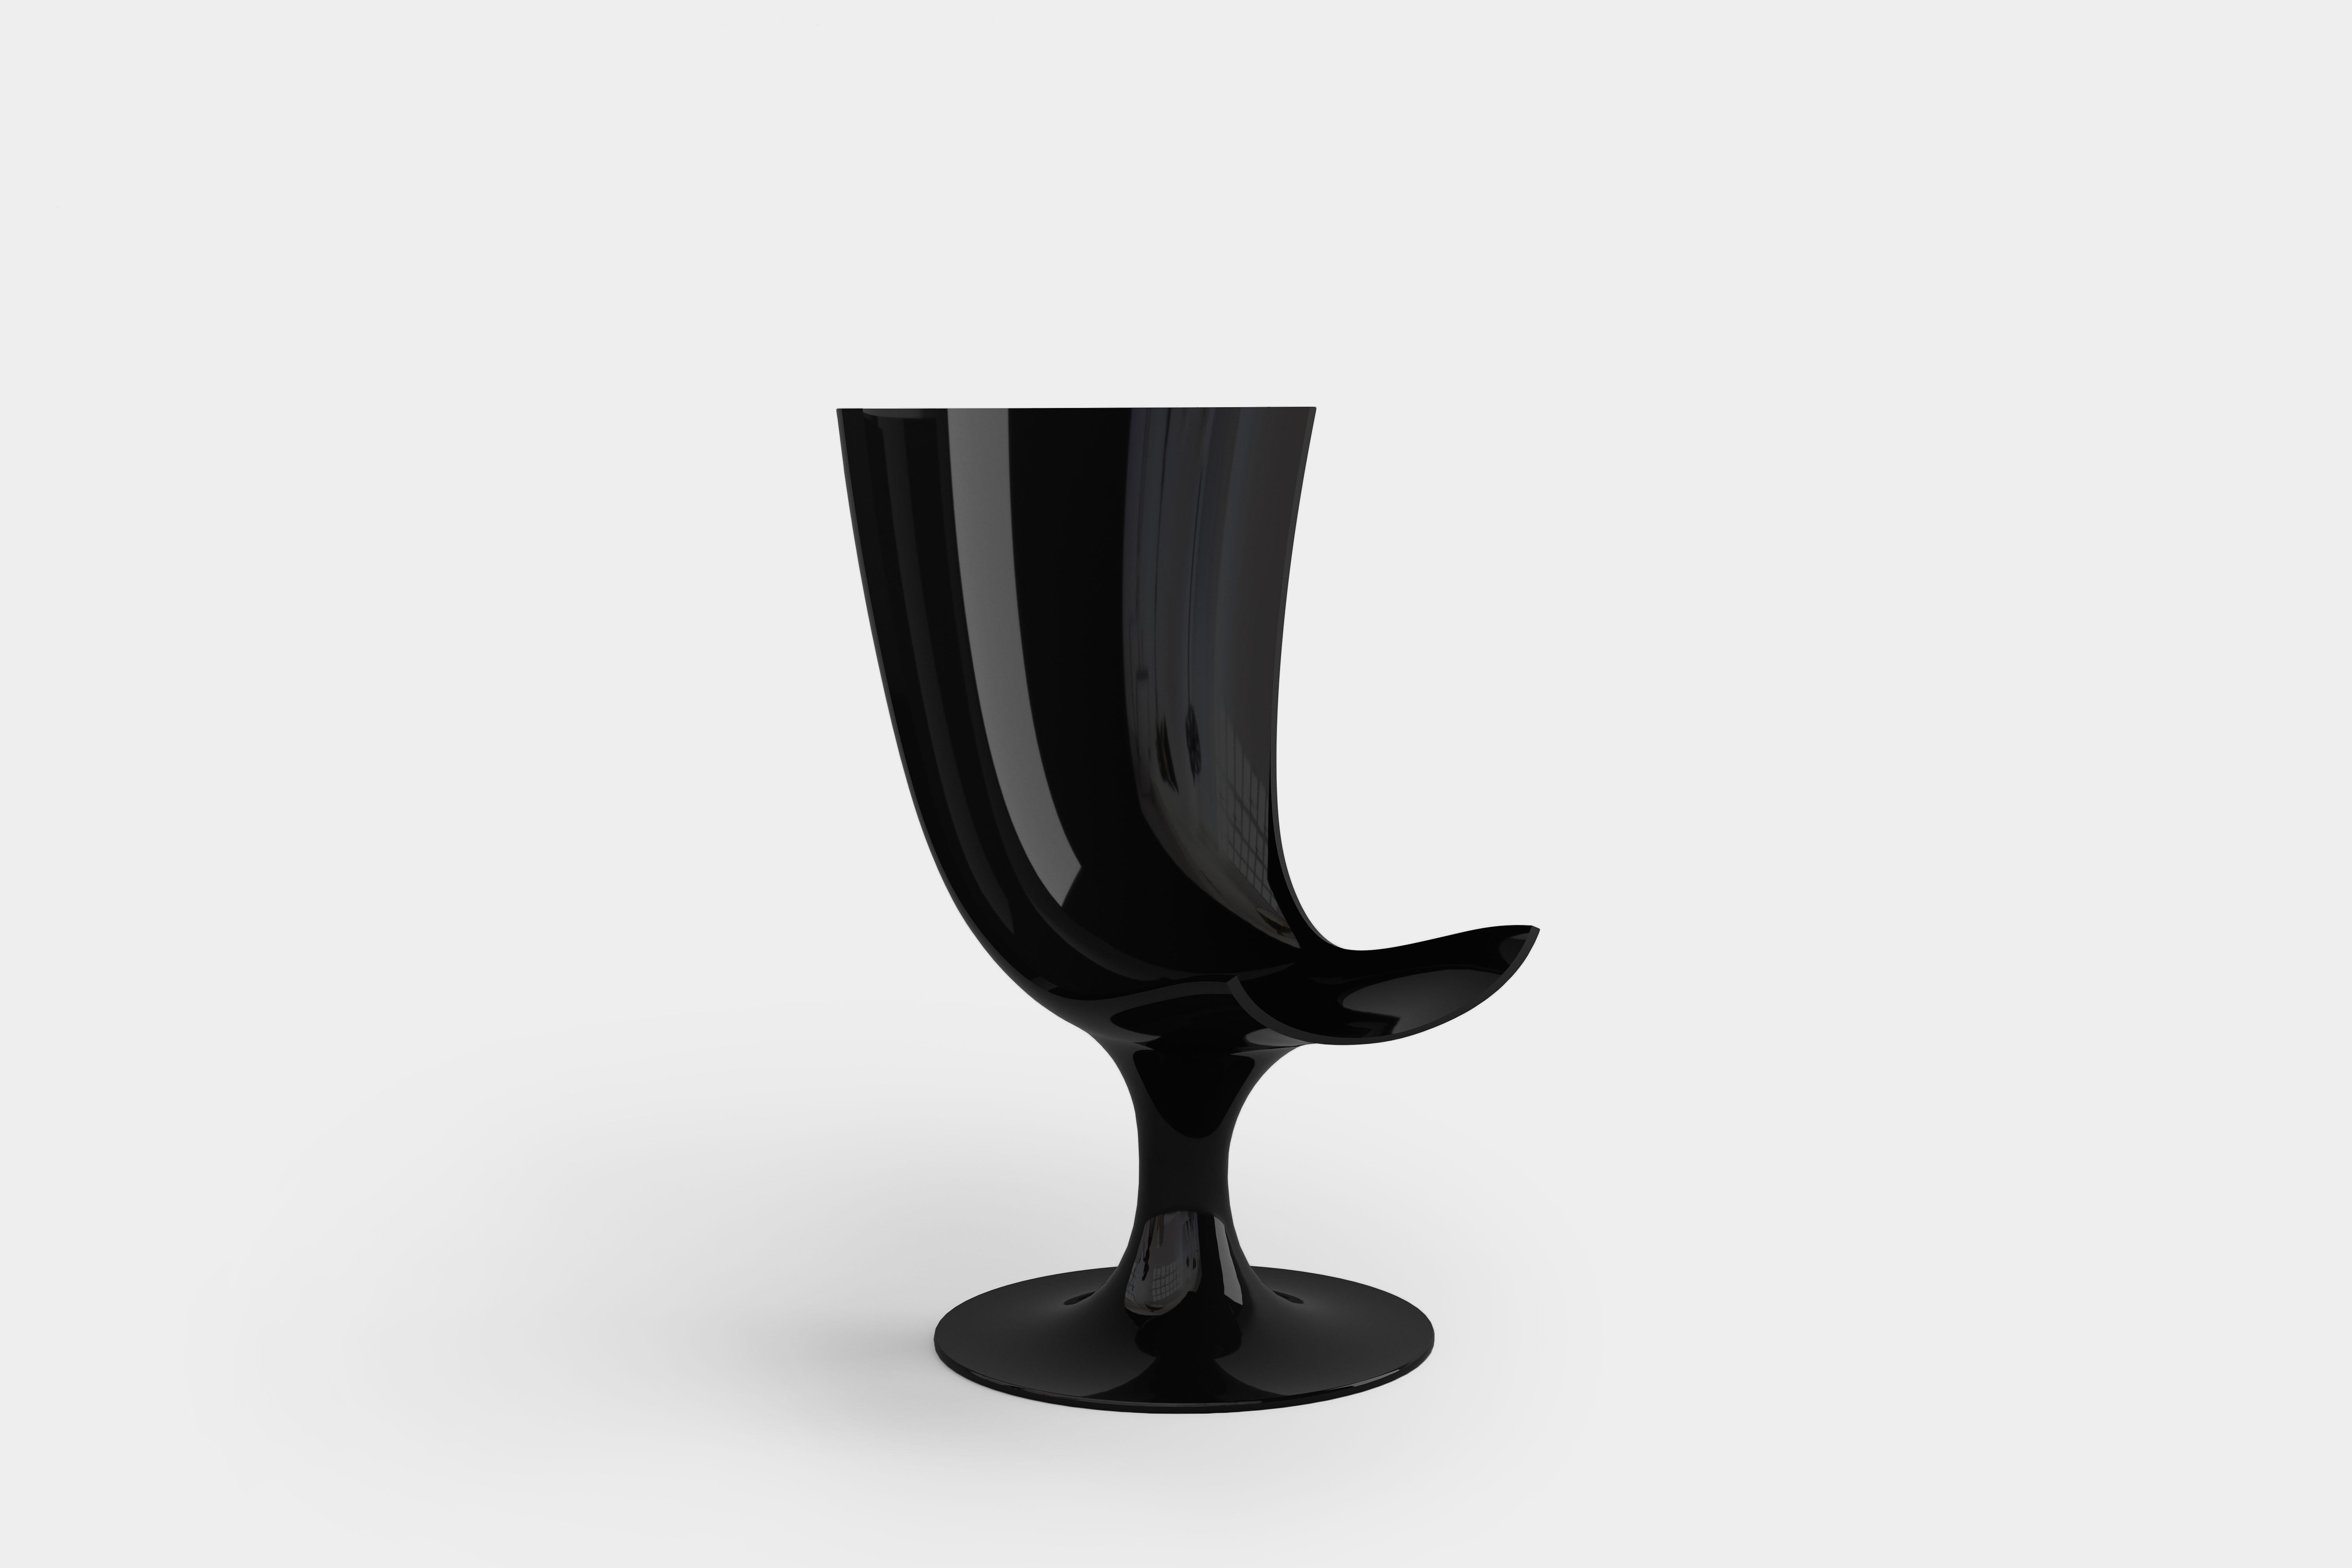 Mexican Santos, Imposing Seat, Sculptural Chair in Black by Joel Escalona For Sale